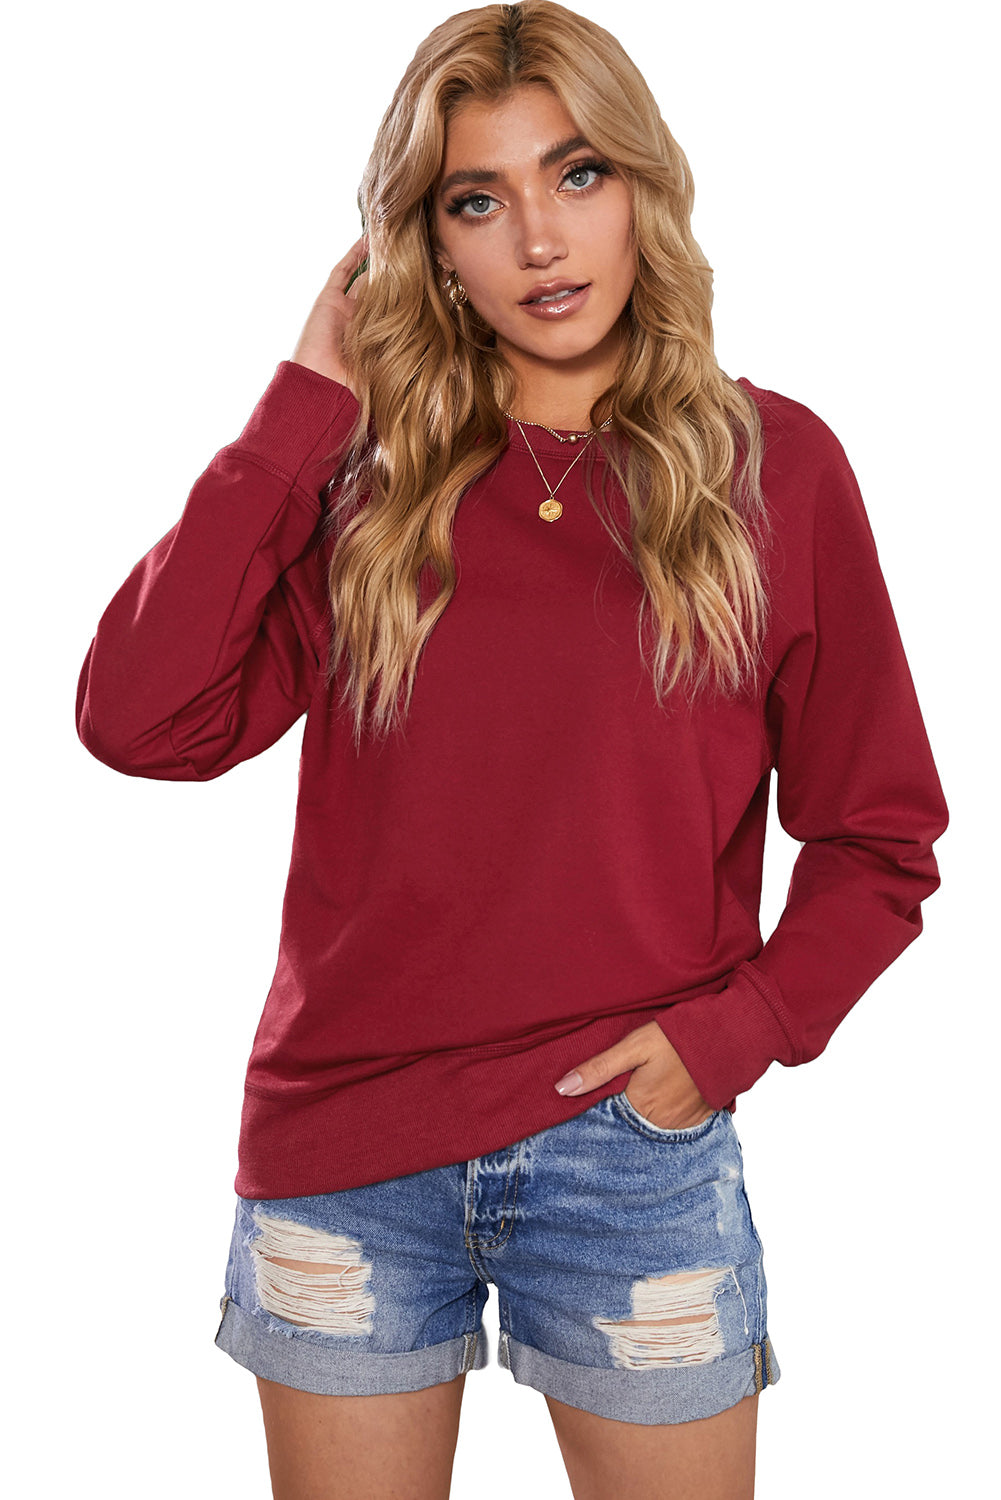 Blank Apparel - French Terry Cotton Blend Pullover Sweatshirt